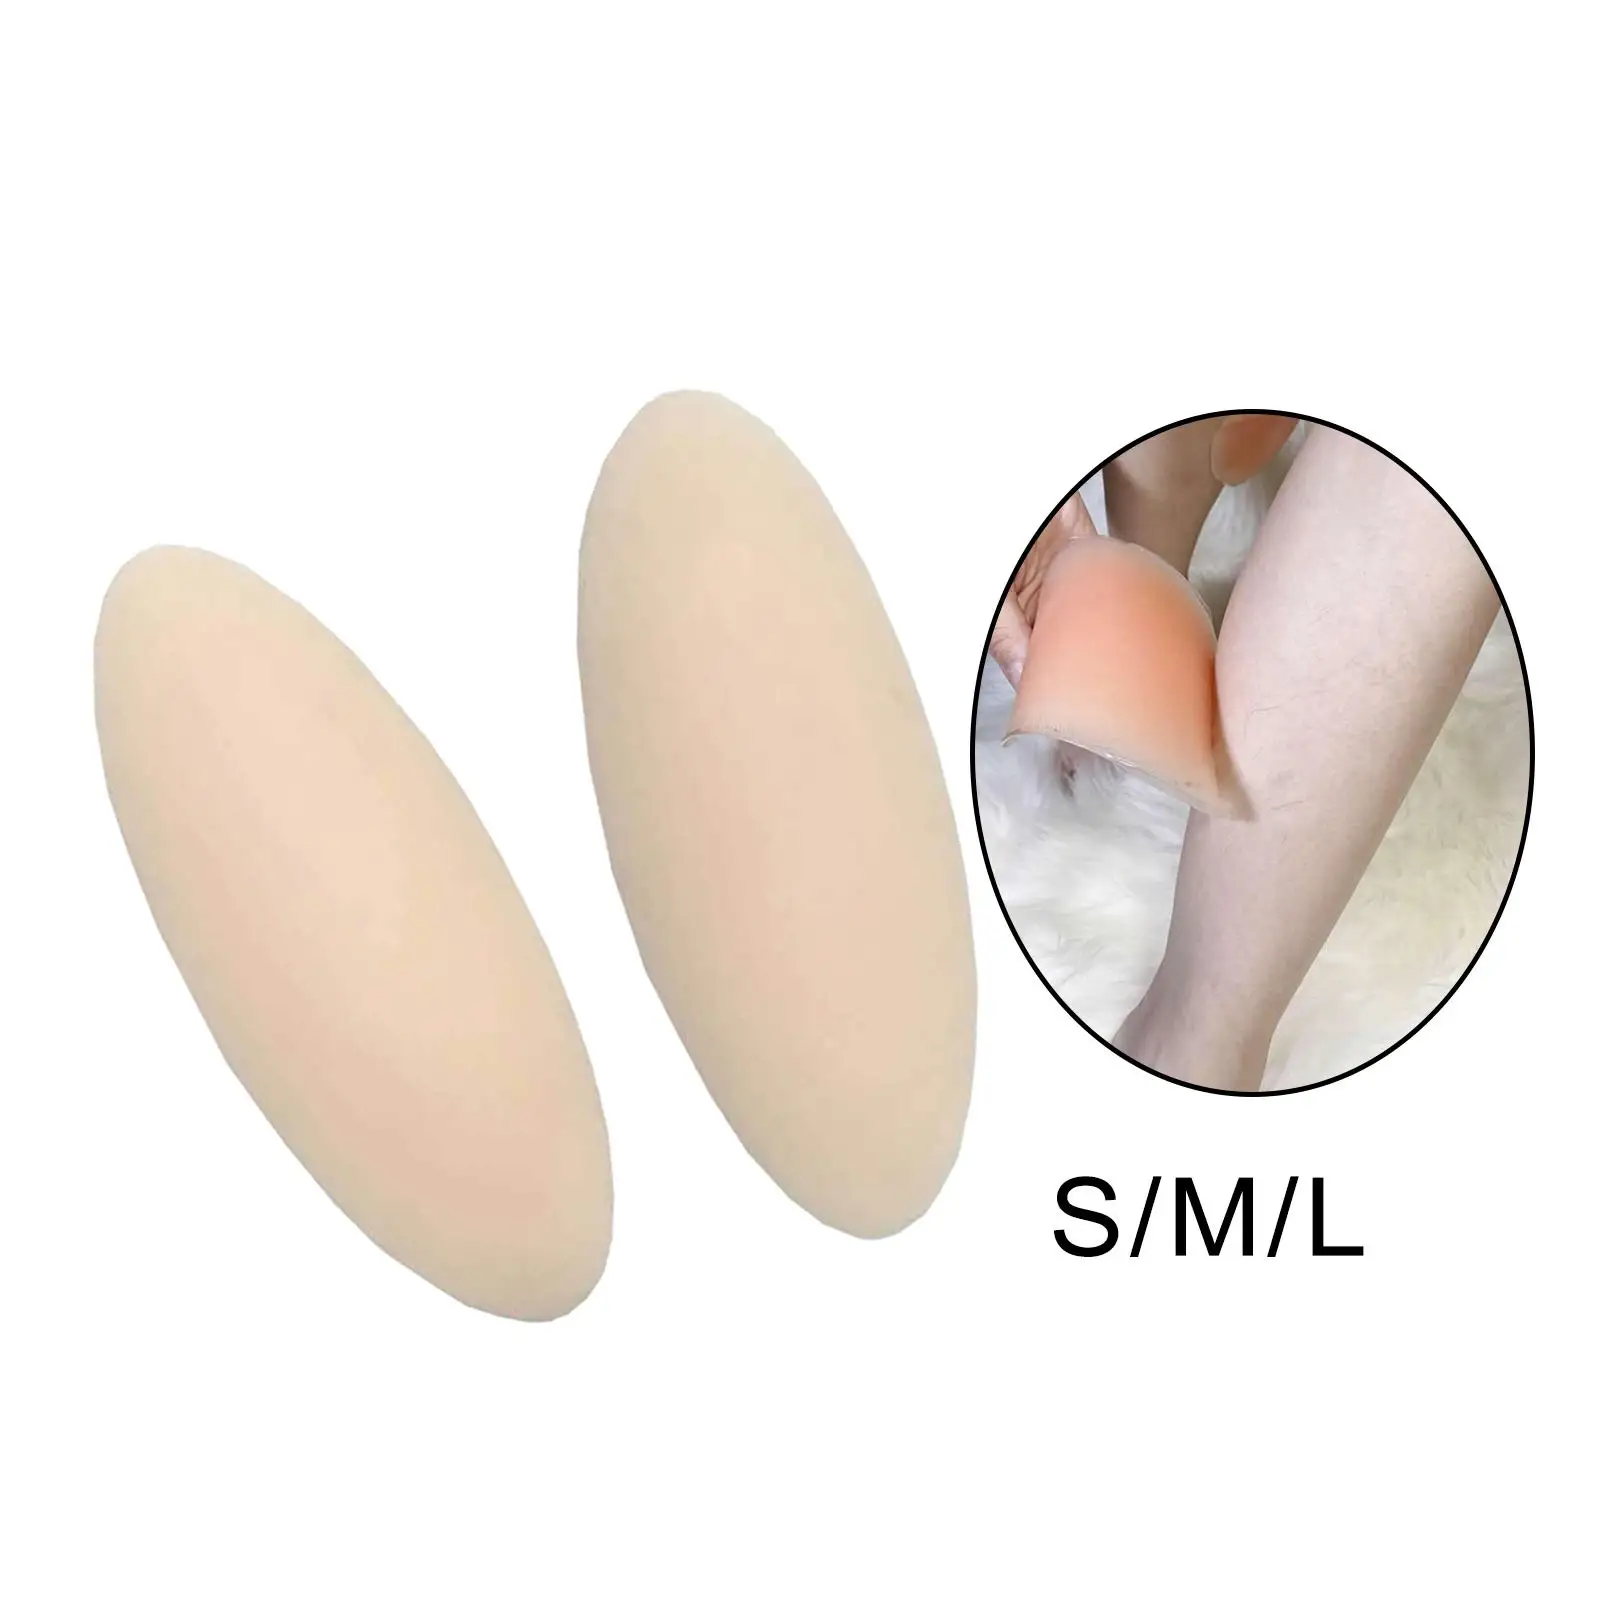 Anti Allergic Calf Pads Gel Leg Correction Pad Comfortable Silicone Leg Onlays for Lady